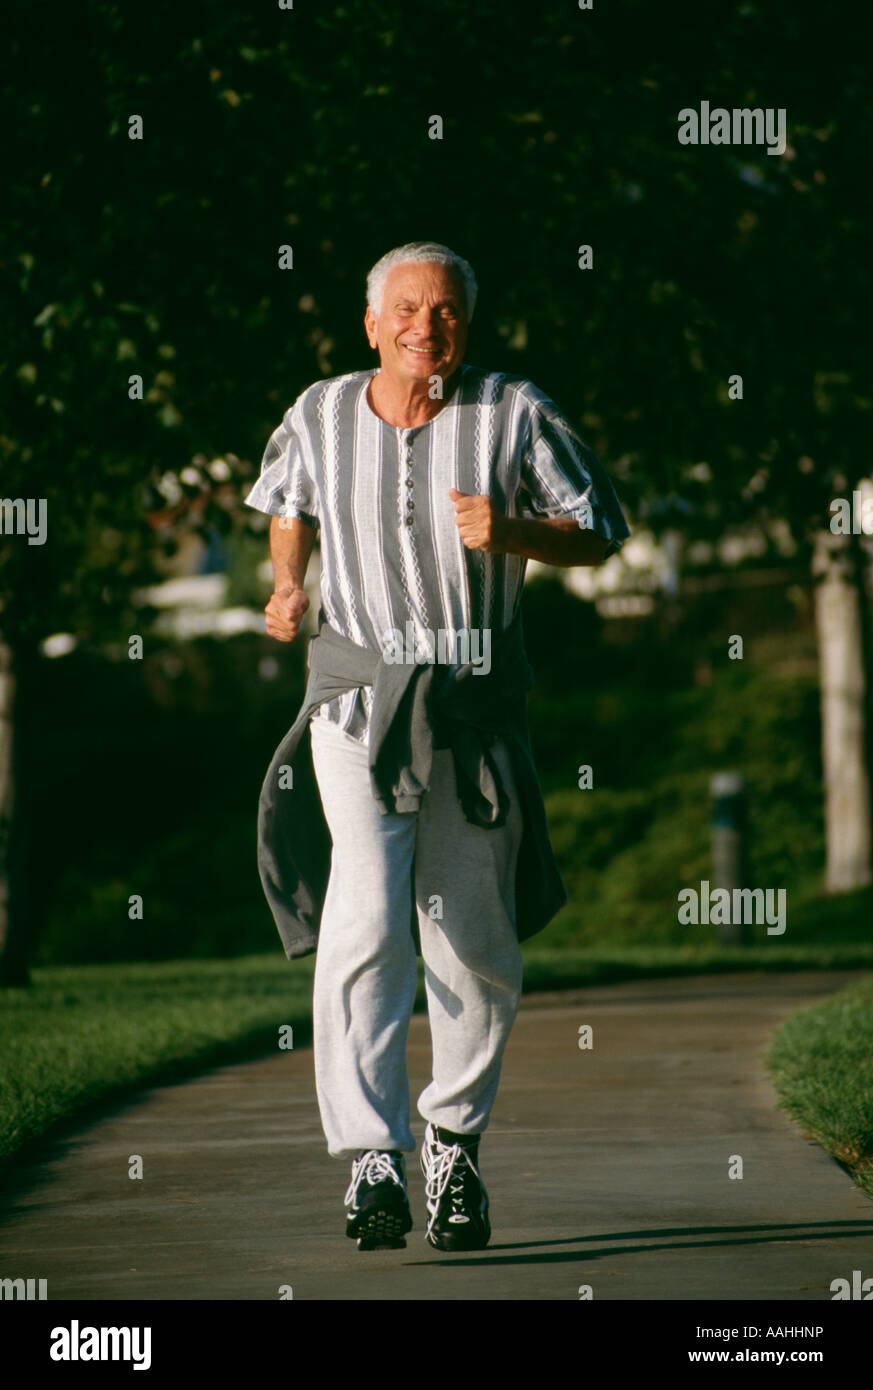 A smiling older man citizen male 73 year old running exercising exercise energy energetic sun glasses sunglasses  in the park green copy space POV  MR Stock Photo